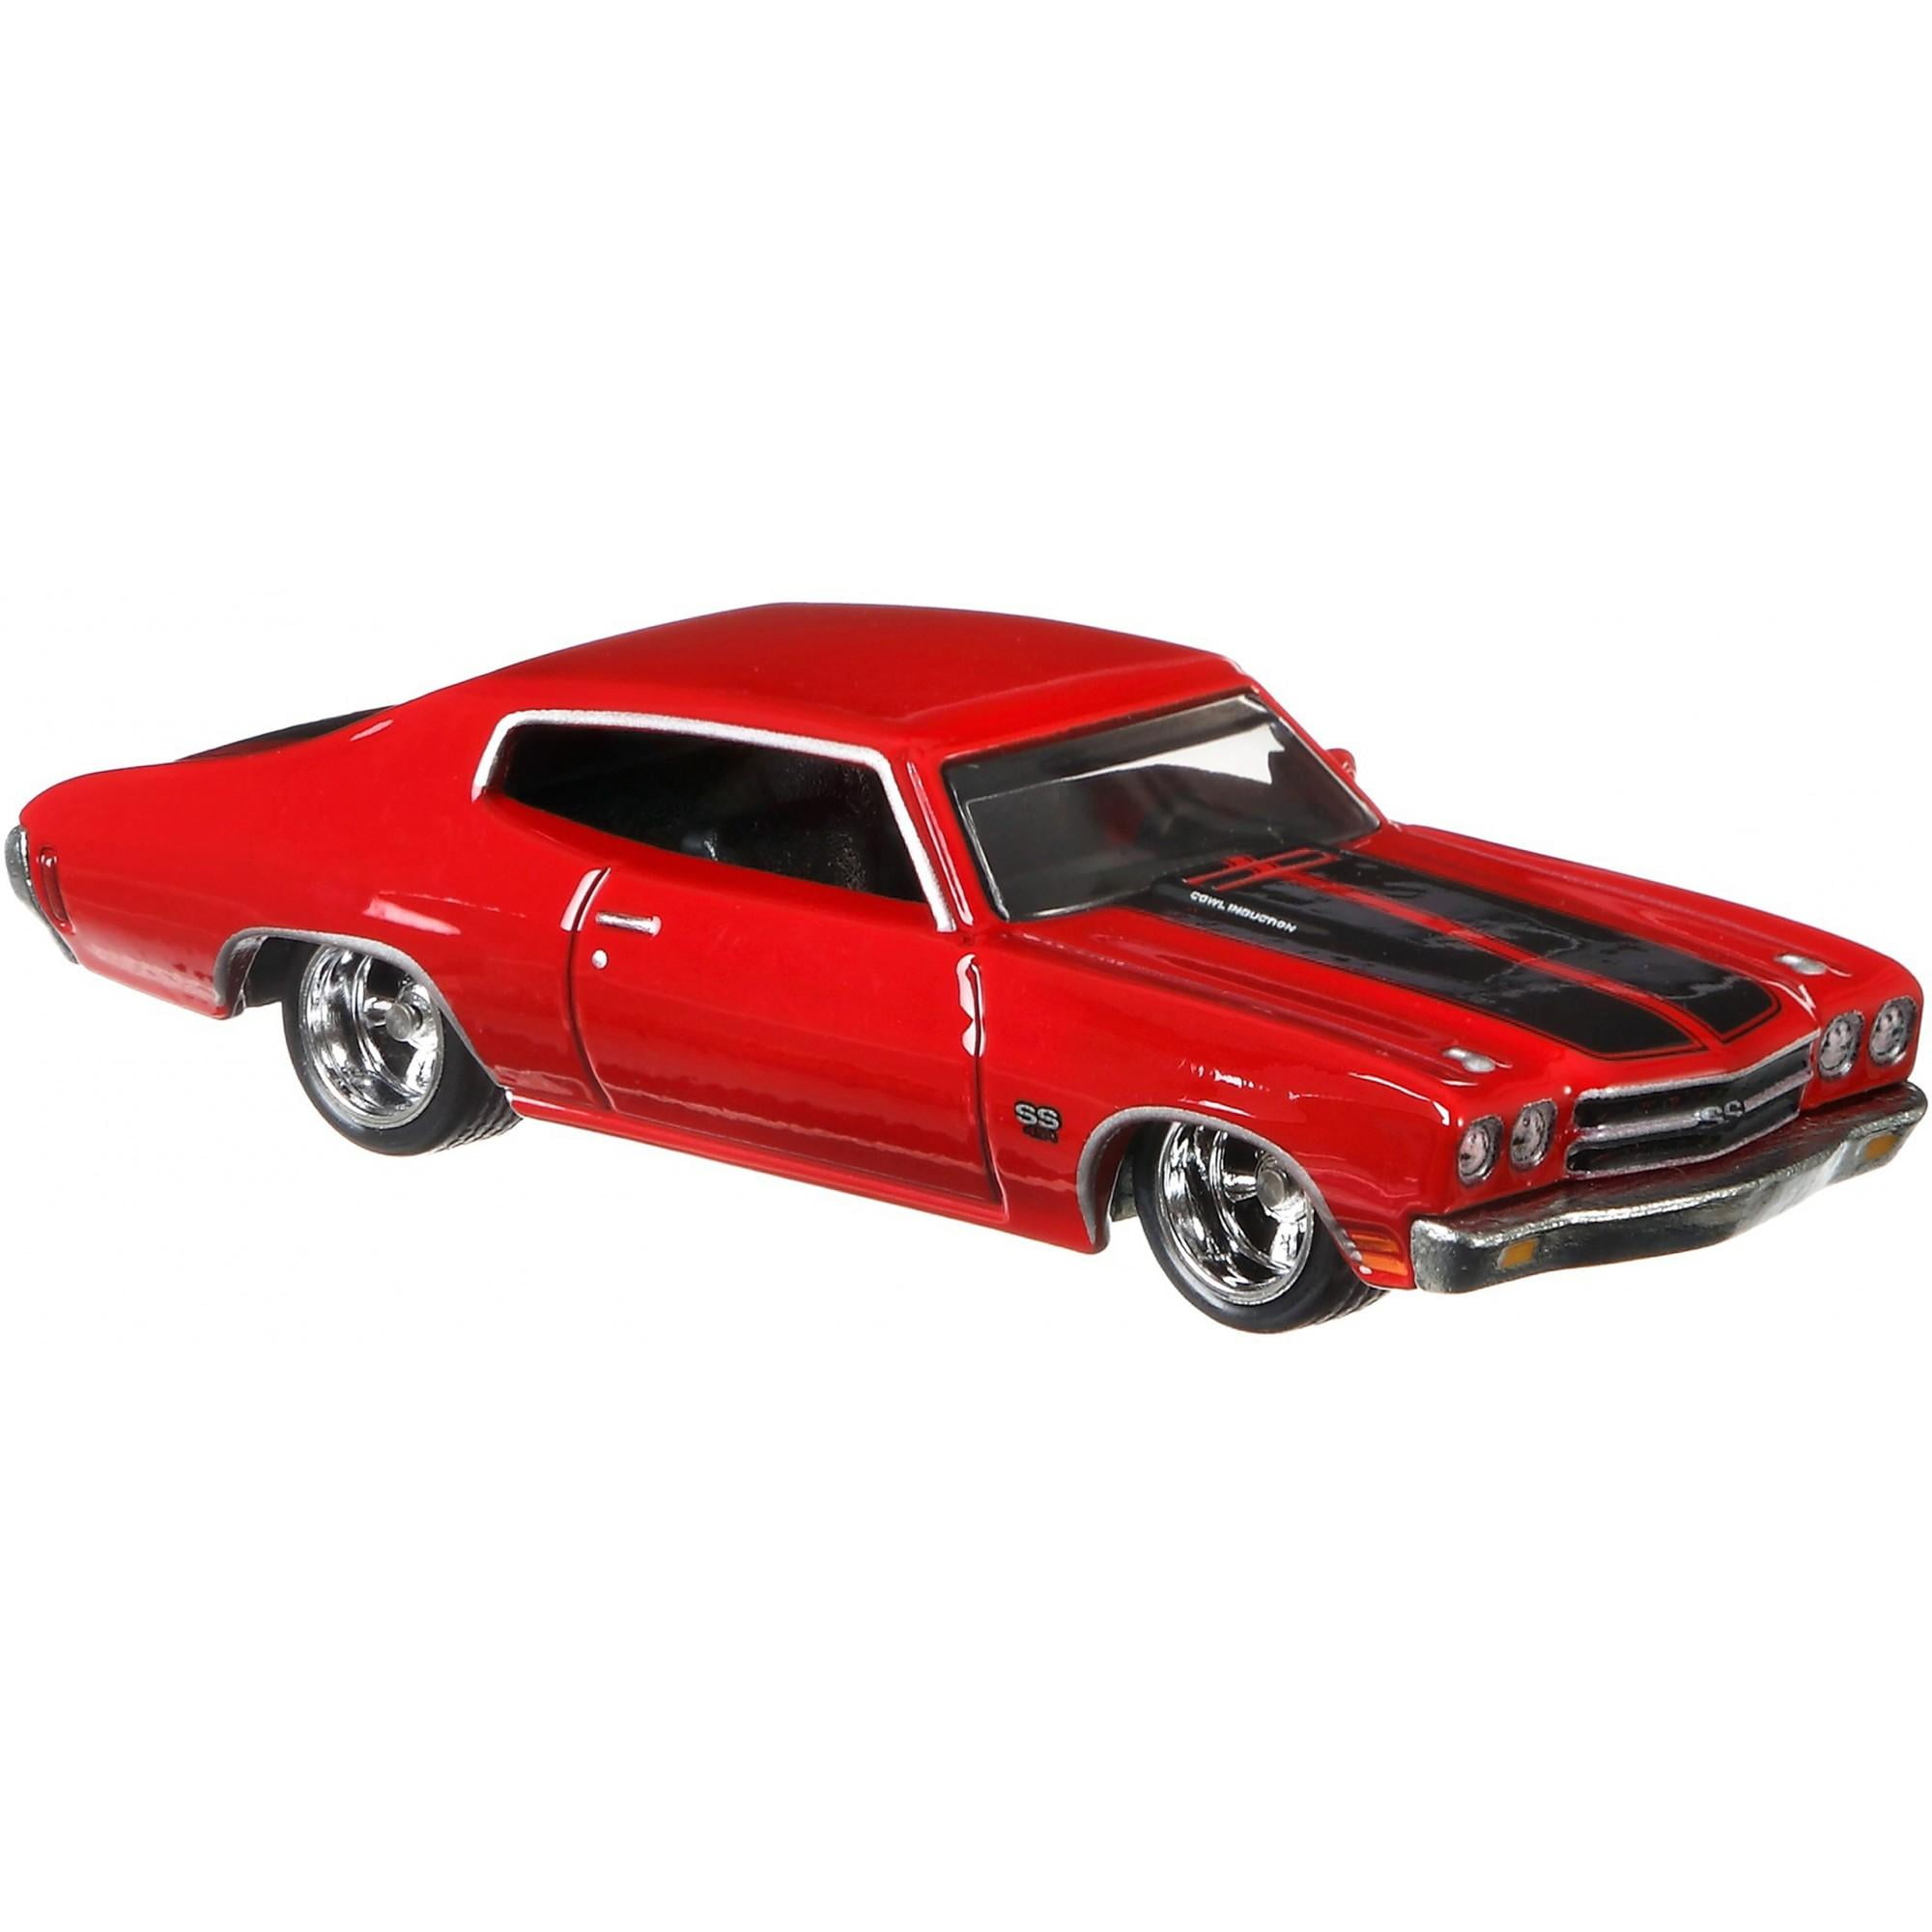 Hot Wheels Premium Fast & Furious 1/4 Mile Muscle 1970 Chevrolet Chevelle SS Red